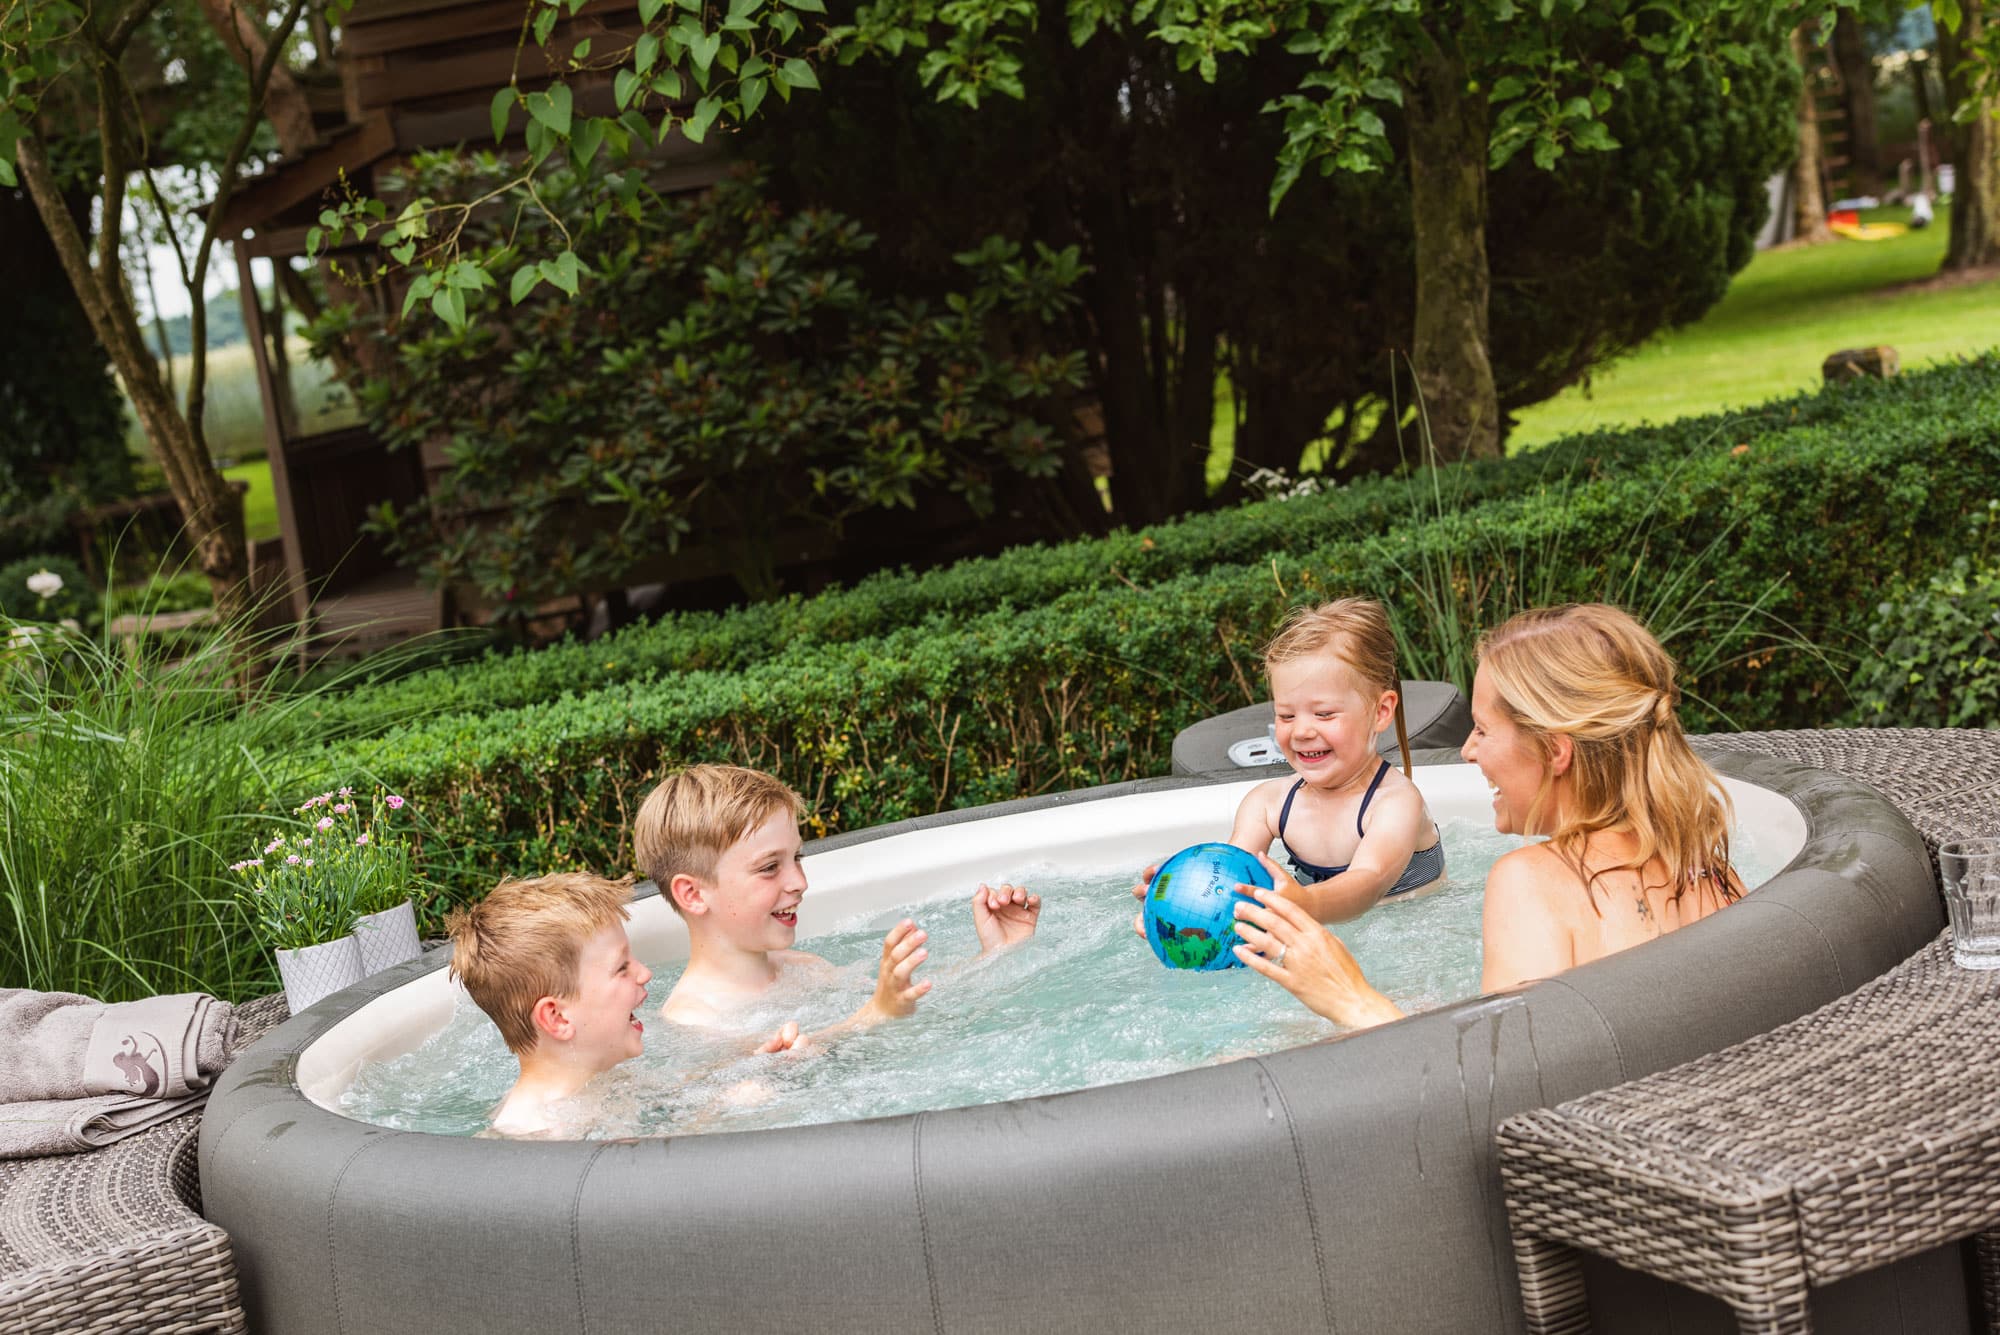 Owning A Softub Spa Is An Experience For The Whole Family